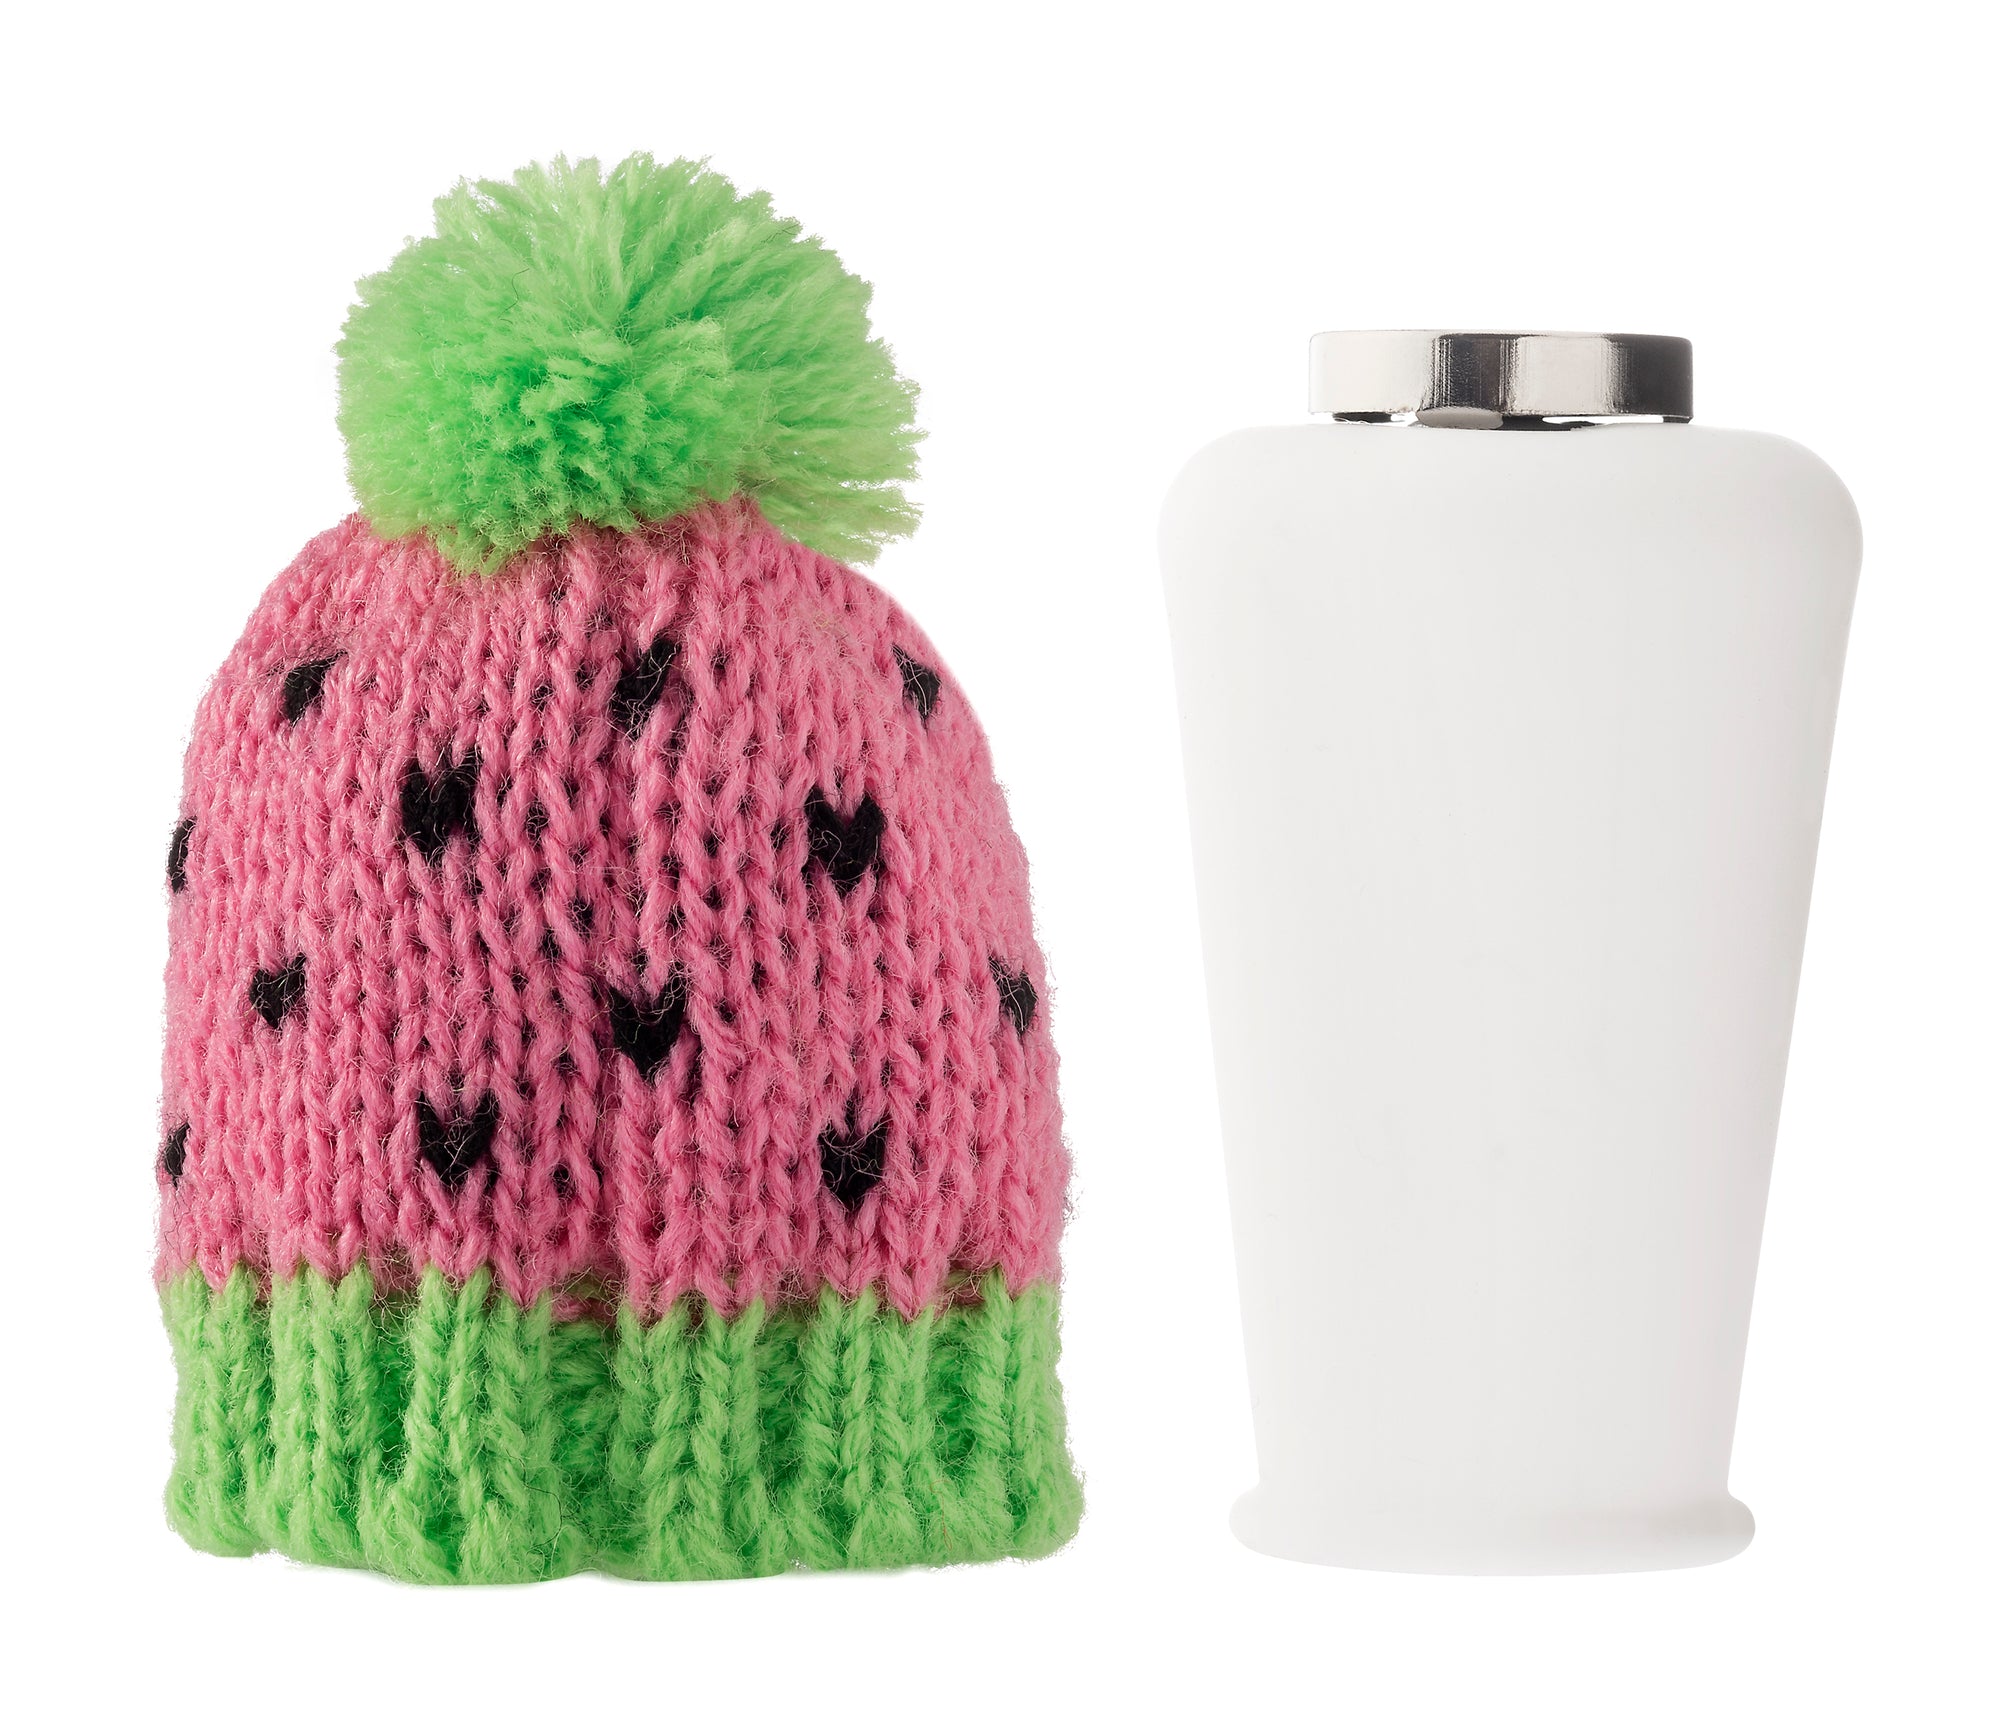 Watermelon Nana Hat | Includes Standard Size BPA-Free Silicone Cap with Magnet